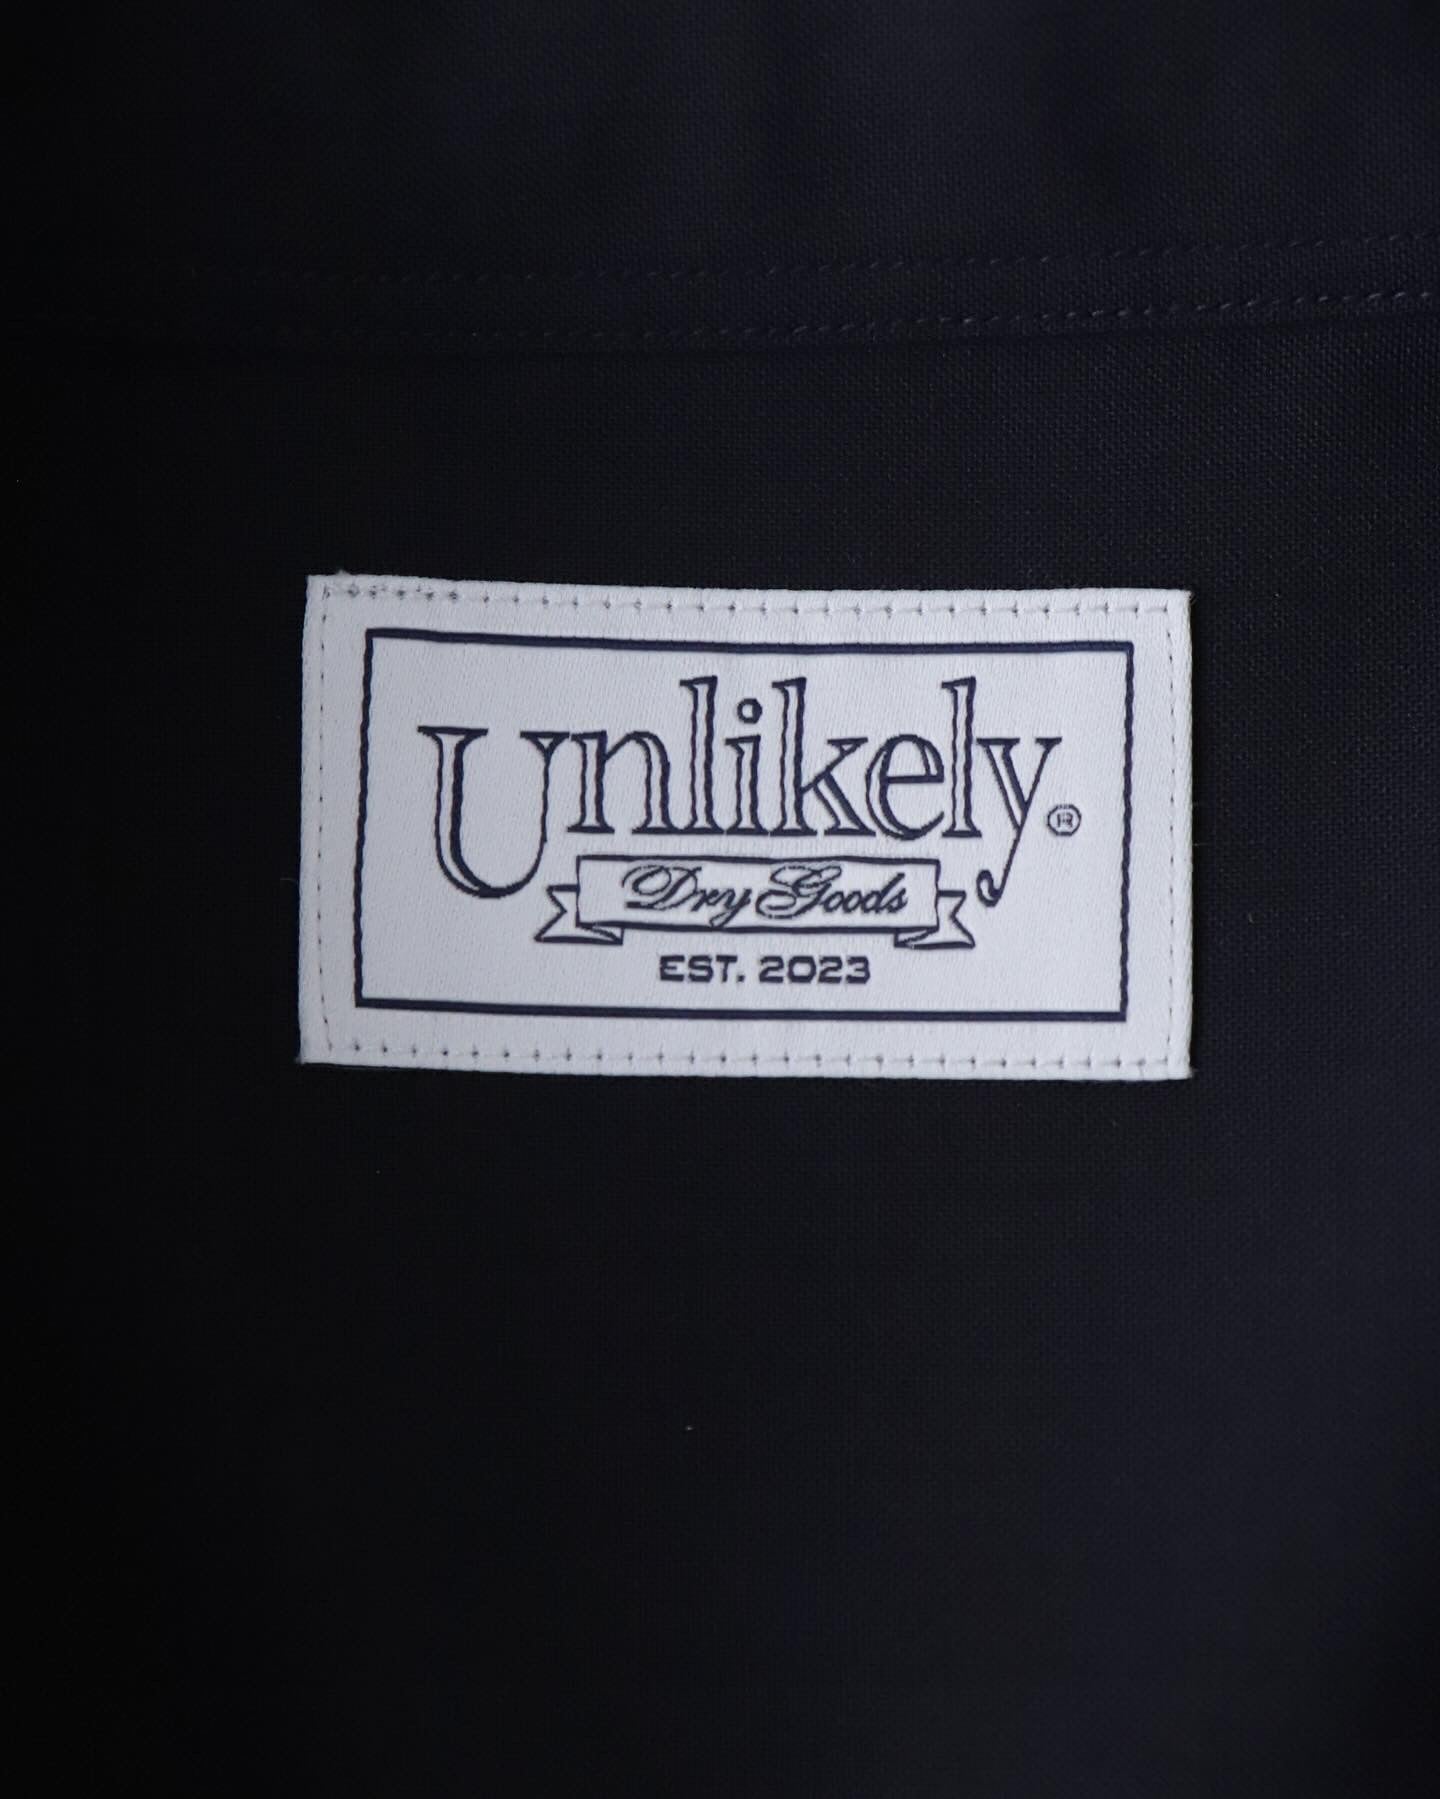 UNLIKELY 2P SPORTS OPEN SHIRTS S/S TROPICAL